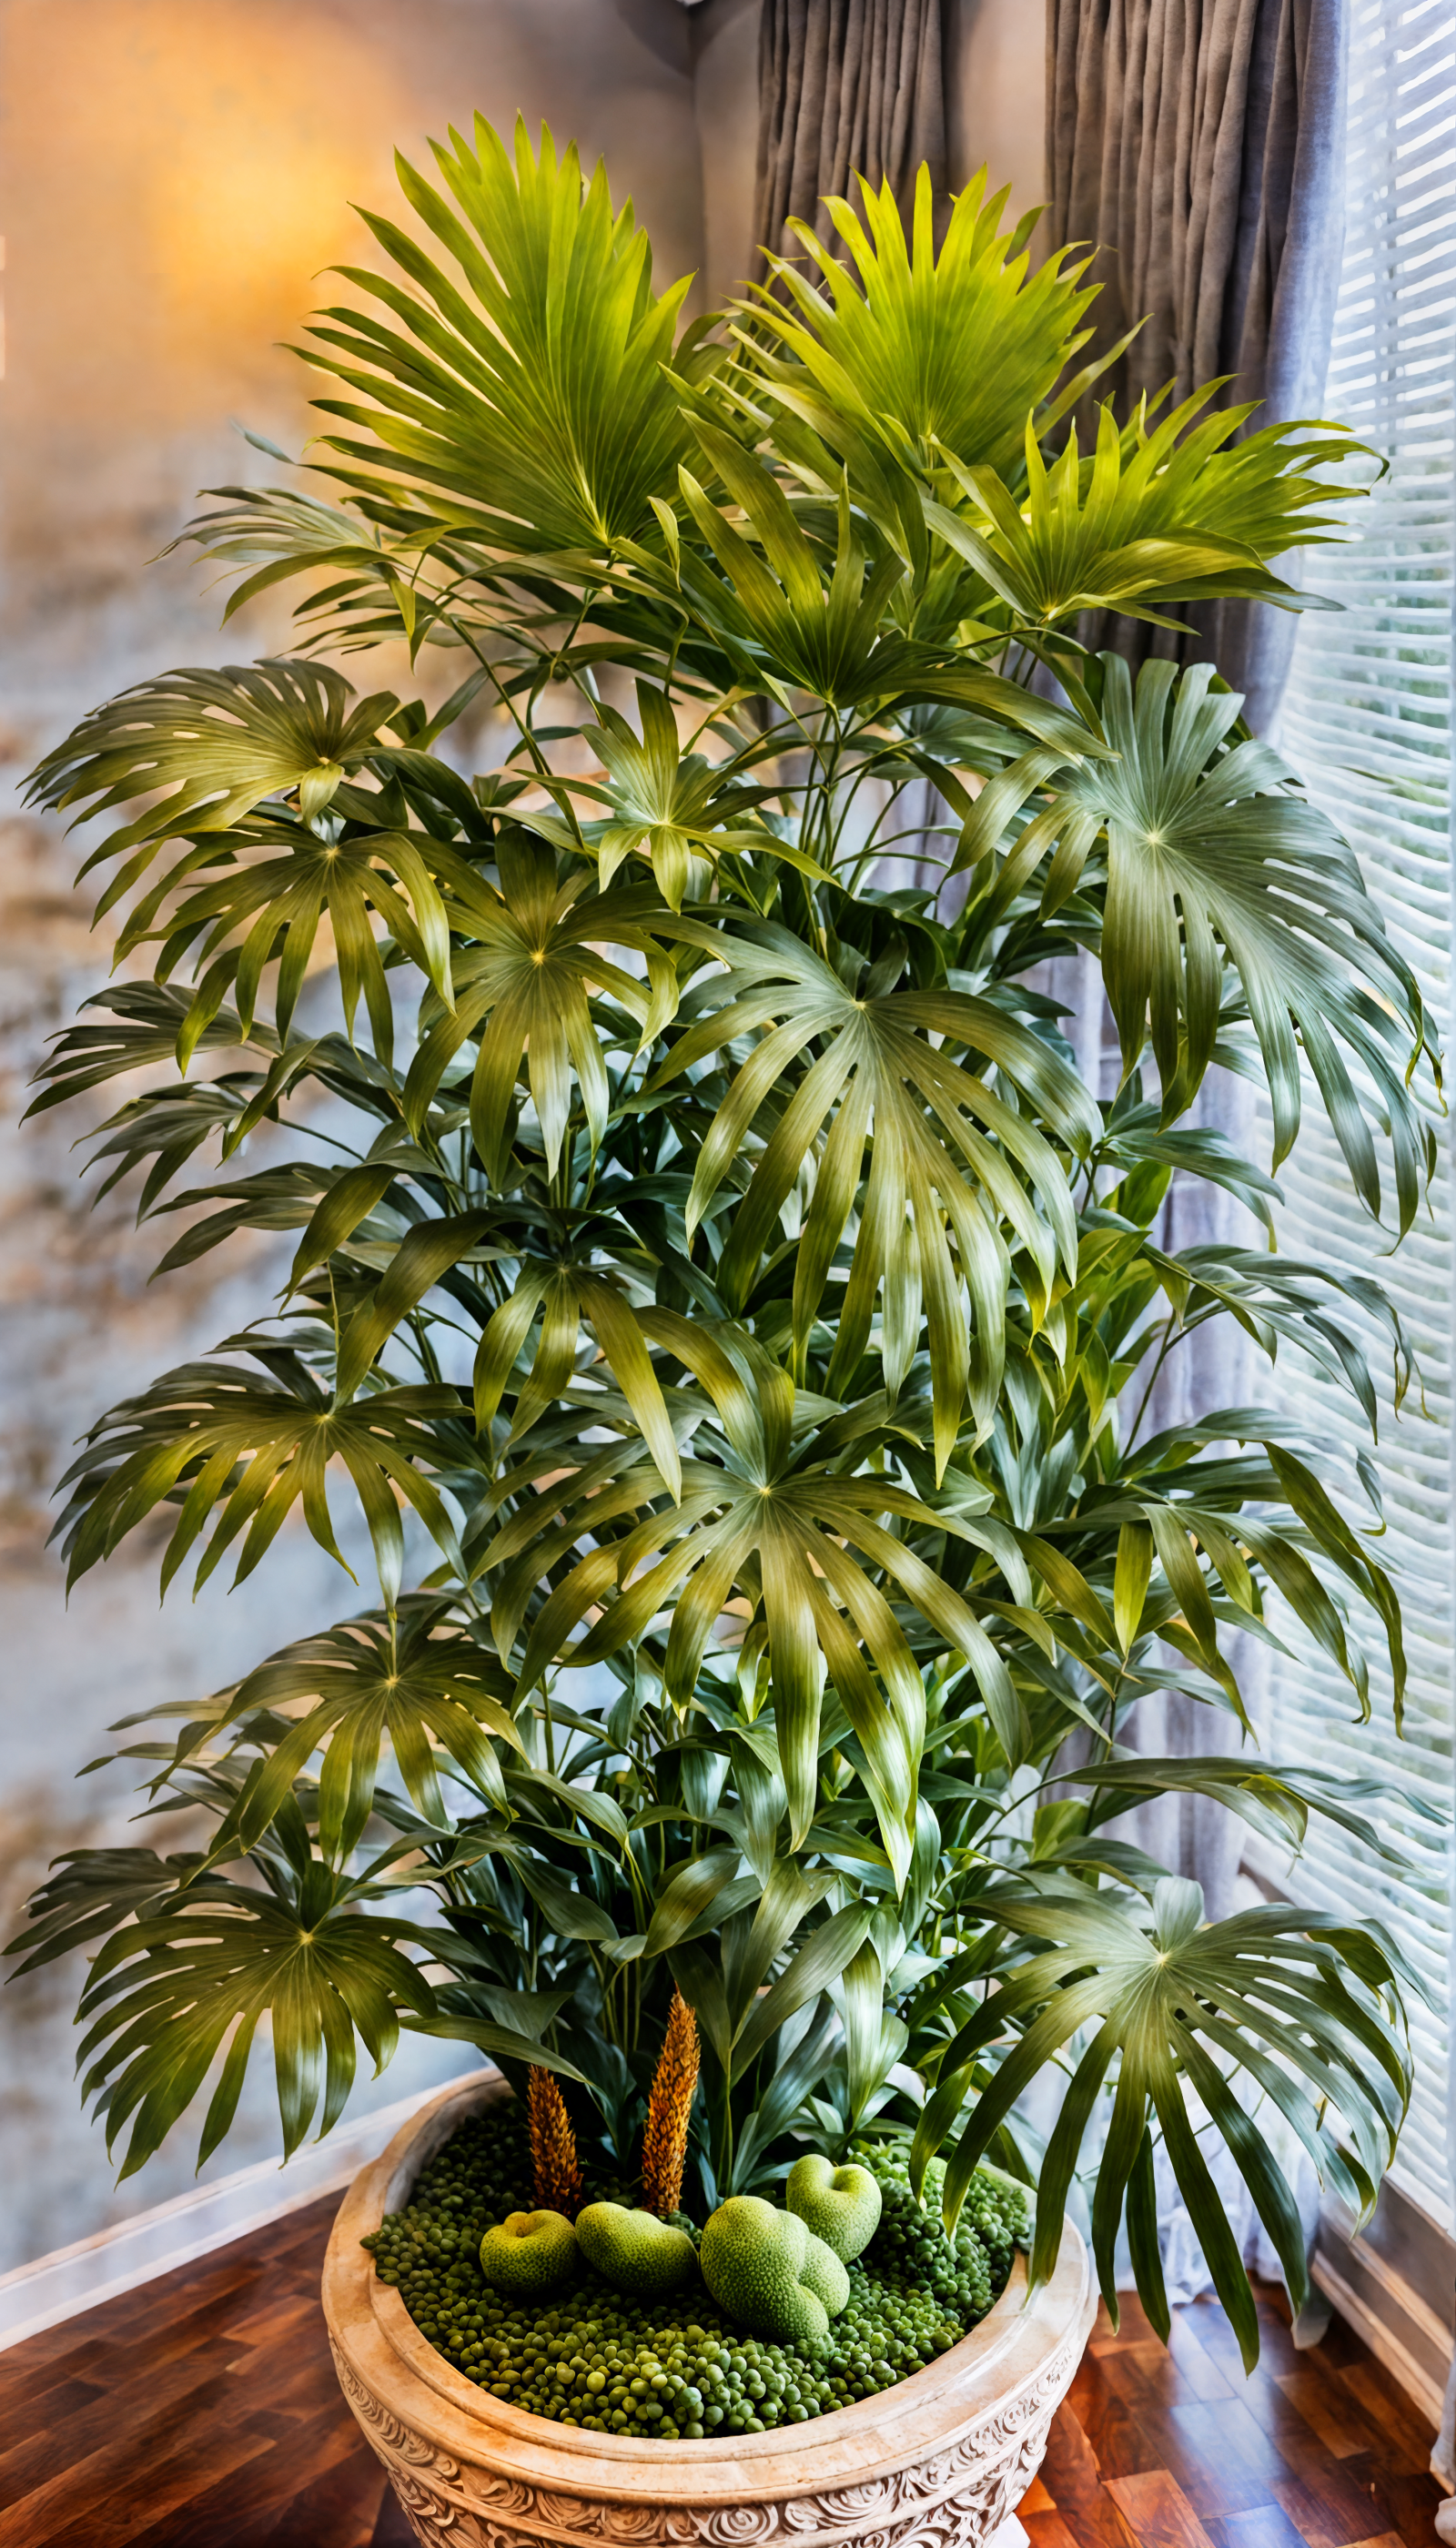 Rhapis excelsa in a bowl planter on a wooden floor, with clear, neutral lighting.